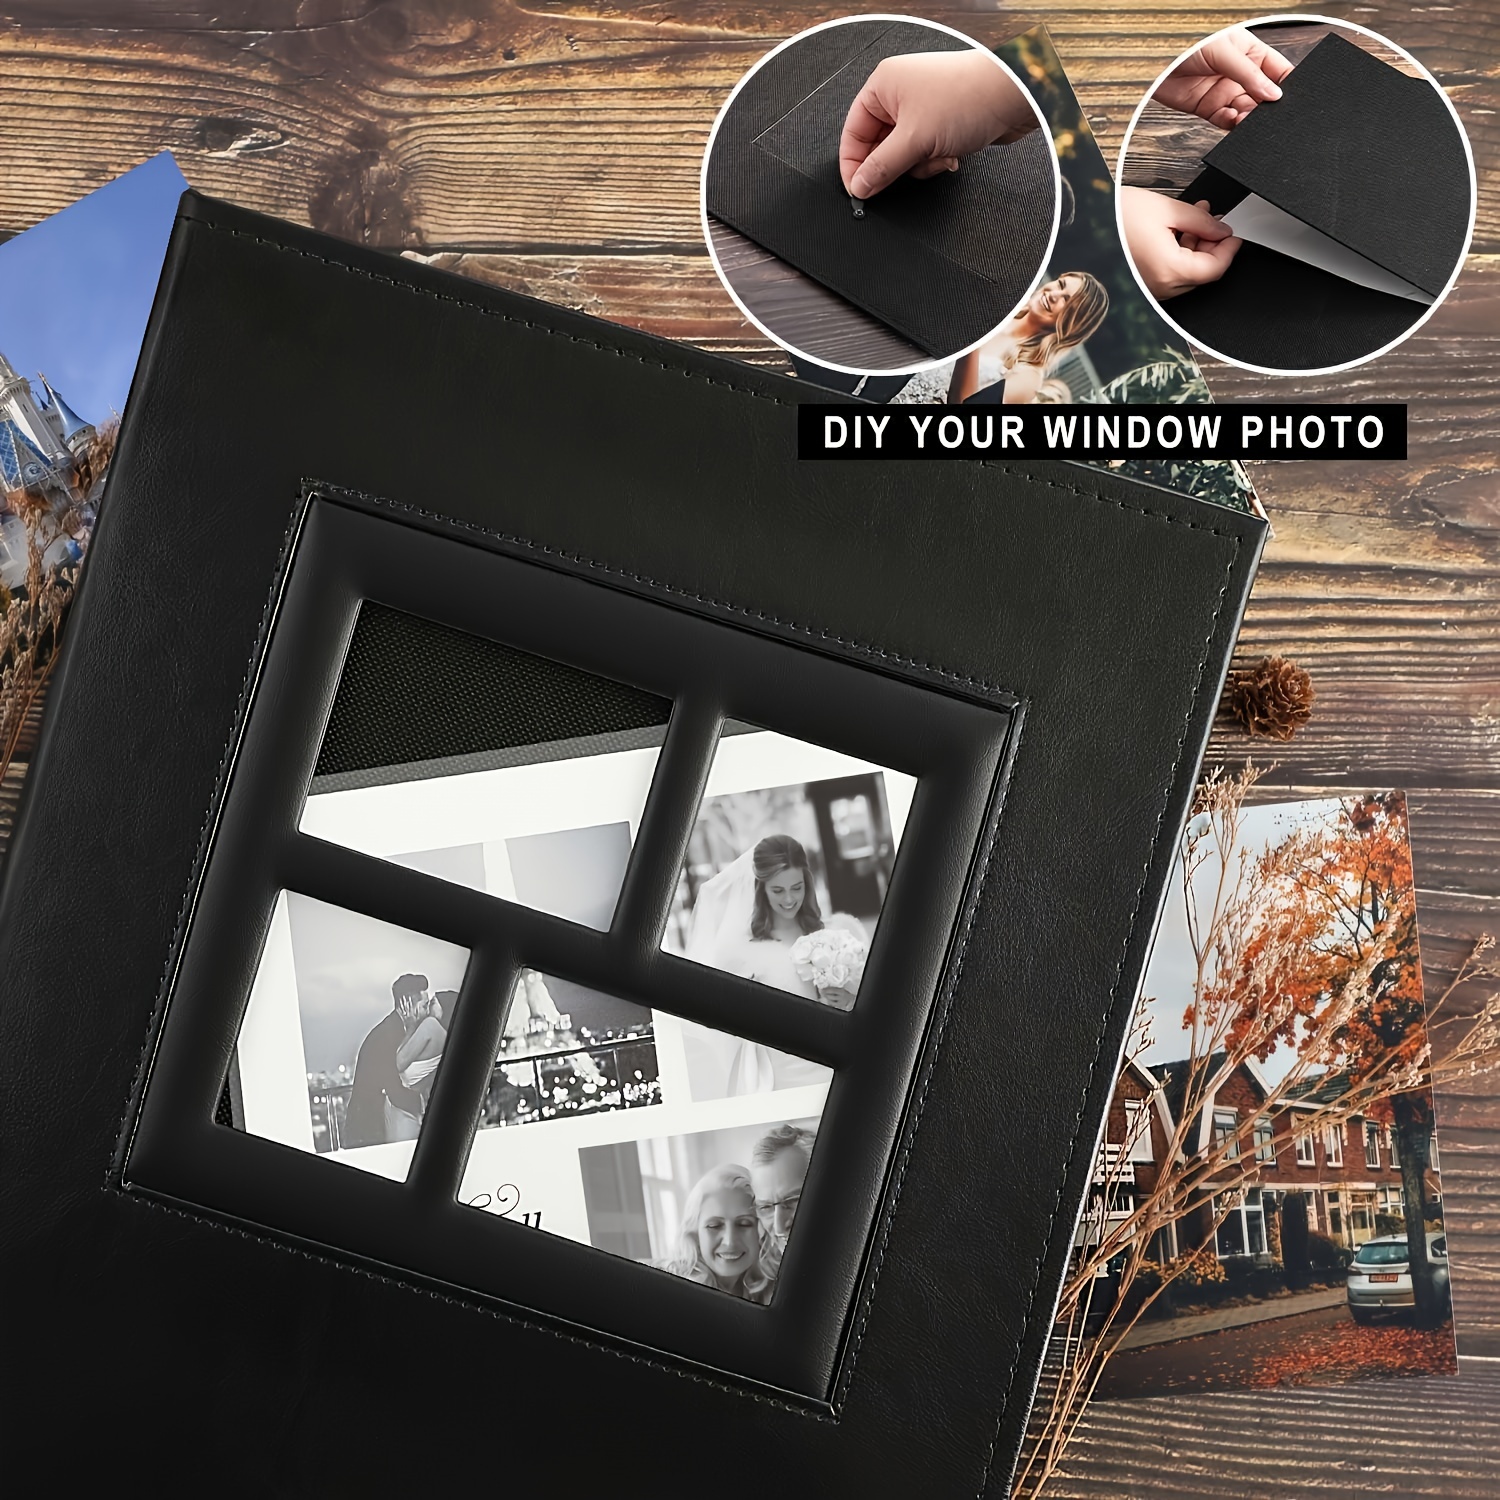 Lanpn Traditional Photo Album 4x6 1000 Pockets, Extra Large Capacity  Classic Vintage Pictures Albums Holds 1000 Vertical Horizontal 4x6 Pictures  Black